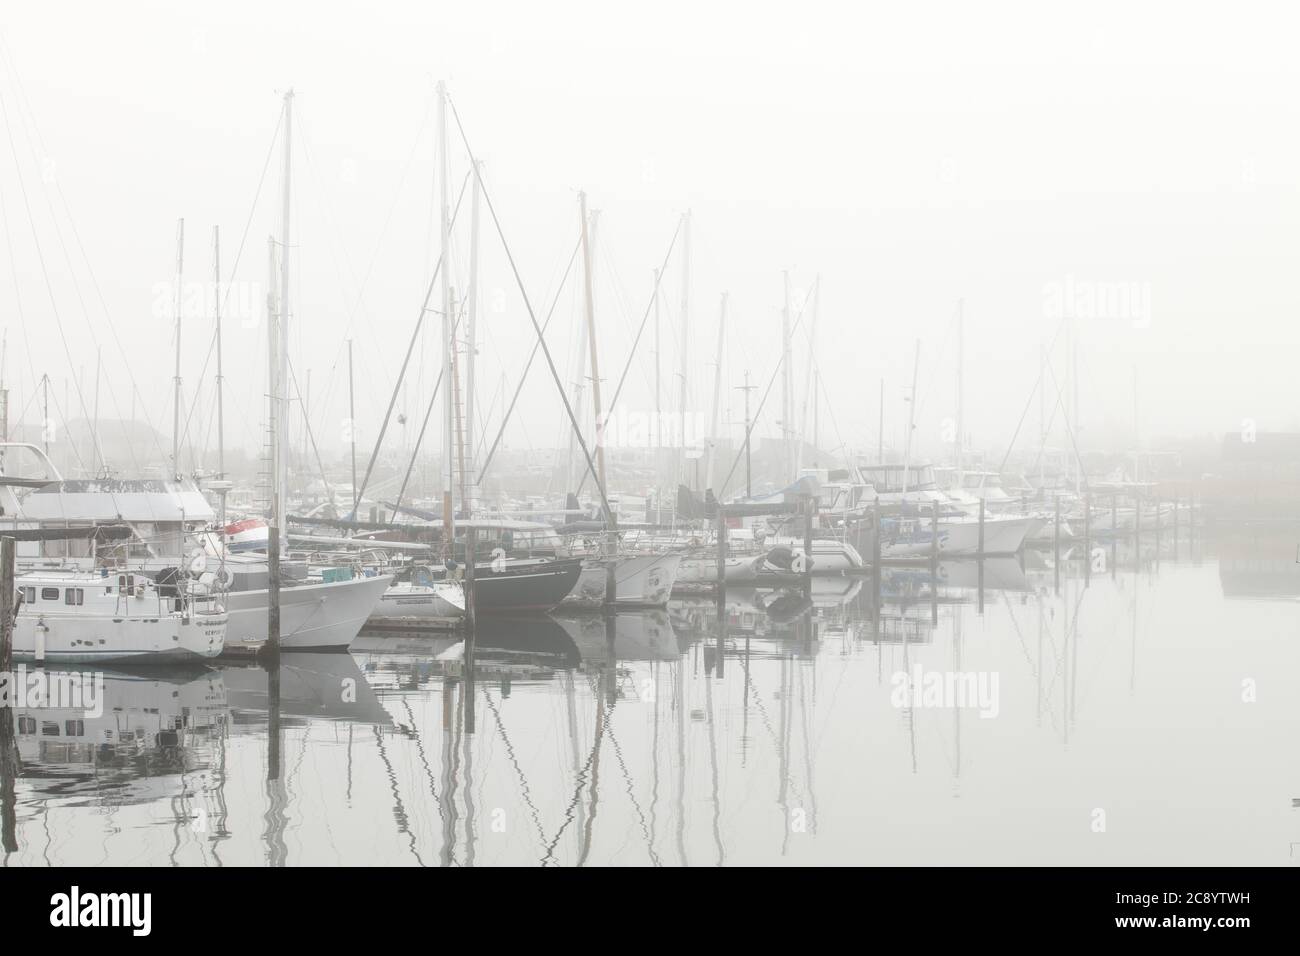 A foggy morning view of the Newport marina on the Yaquina river in Oregon.  There are many commercial and private fishing boats morred in the backgrou Stock Photo